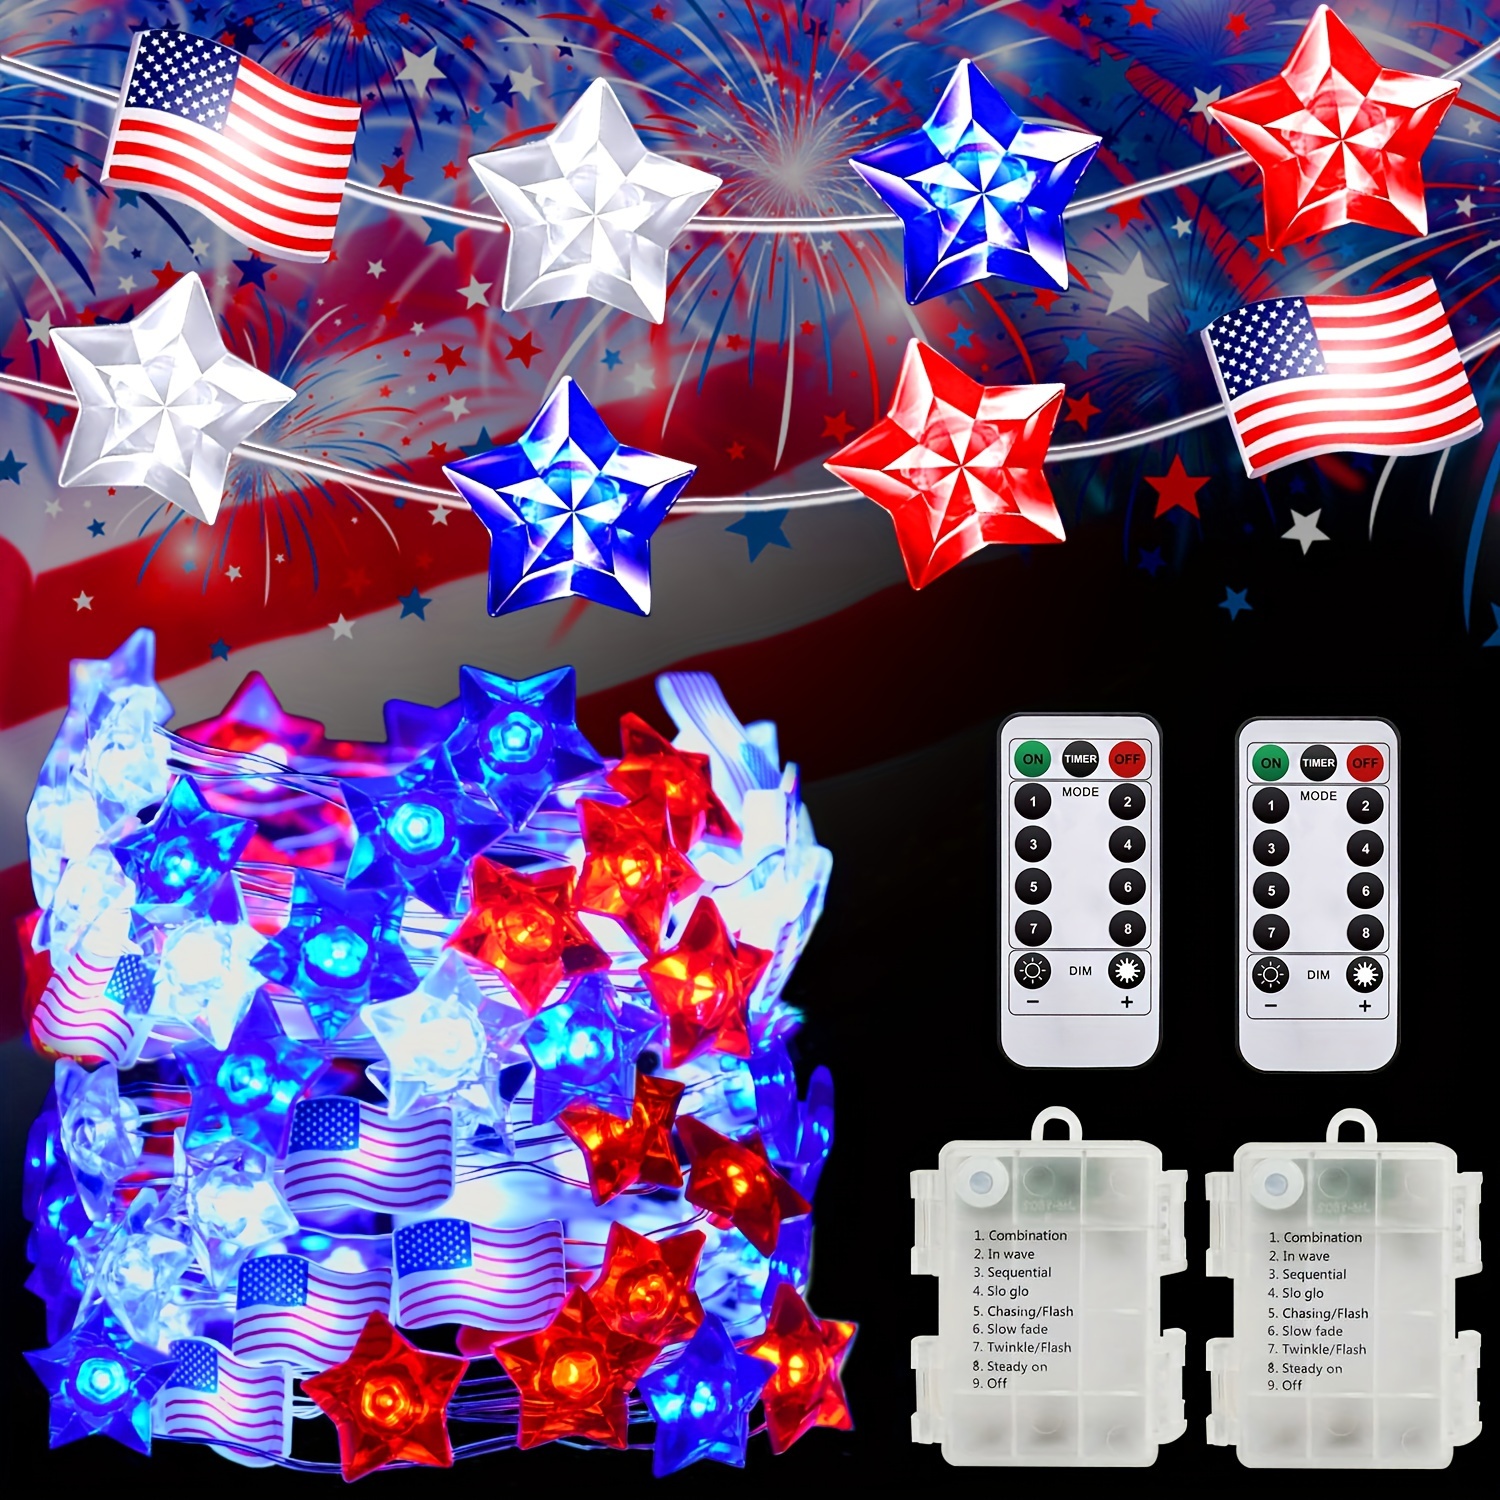 

100 Led Lights Mini Star & Usa Flag Fairy Lights Battery Operated Remote Timer With 8 Modes, For Memorial Day Decorations, 4th Of July Decorations & Any Patriotic Decor(2 Pack, 34ft)